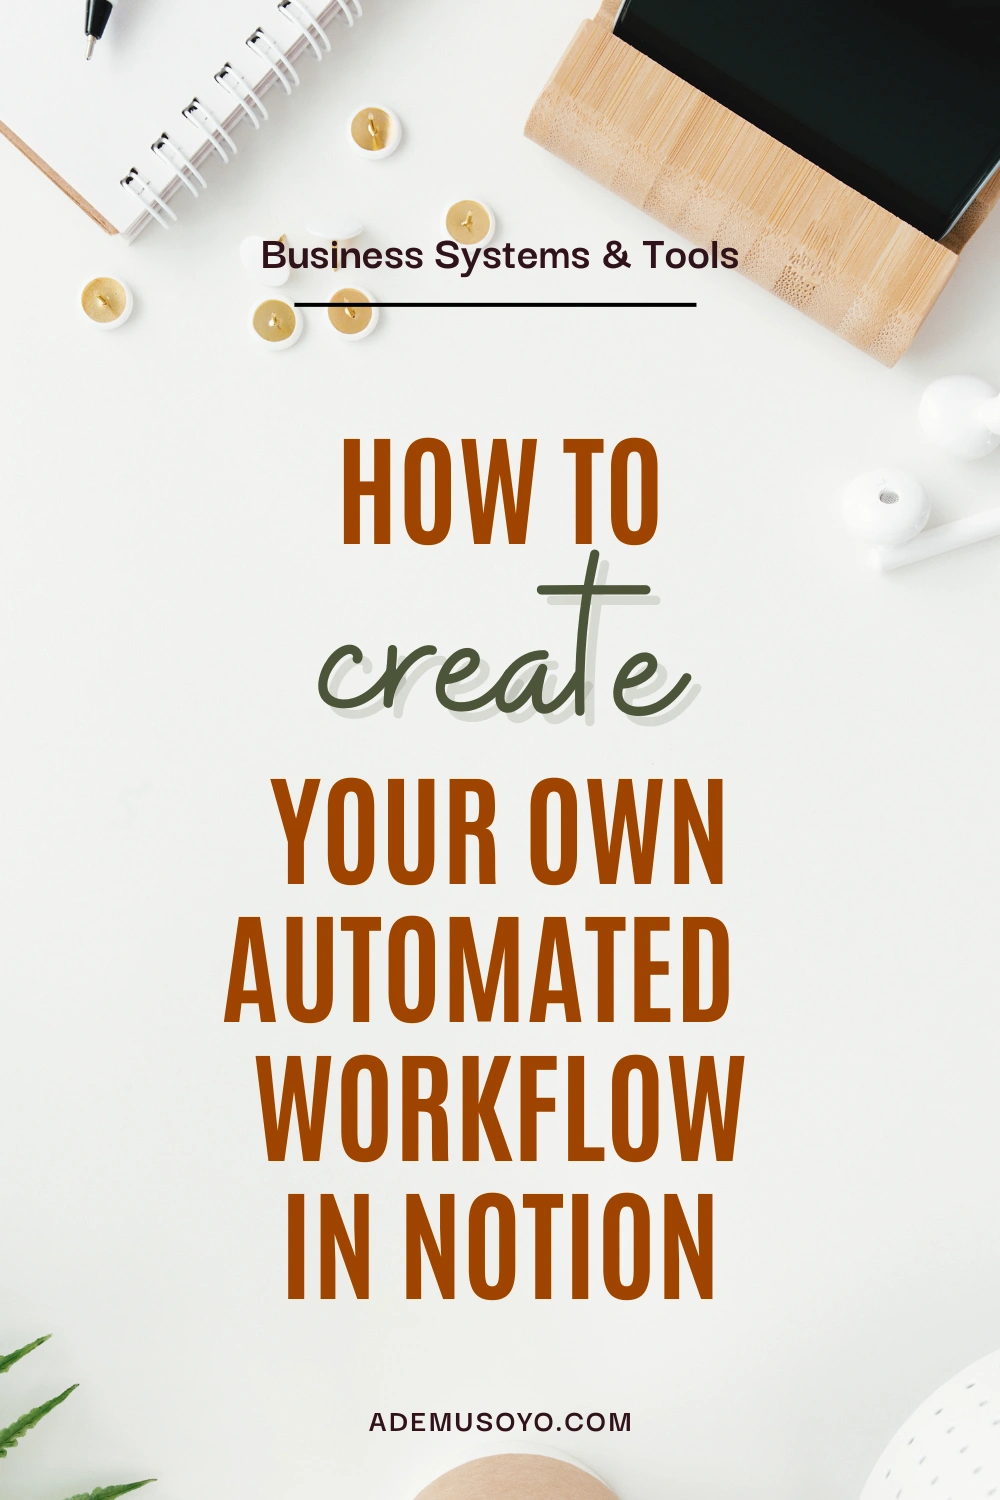 If you’re looking for a way to take your Notion workspace to the next level, adding Automations is the perfect way to do that to further your webflow. In this blog post, Ademusoyo shares how to build your Notion Automation Workflow easily even as a beginner. Read now.